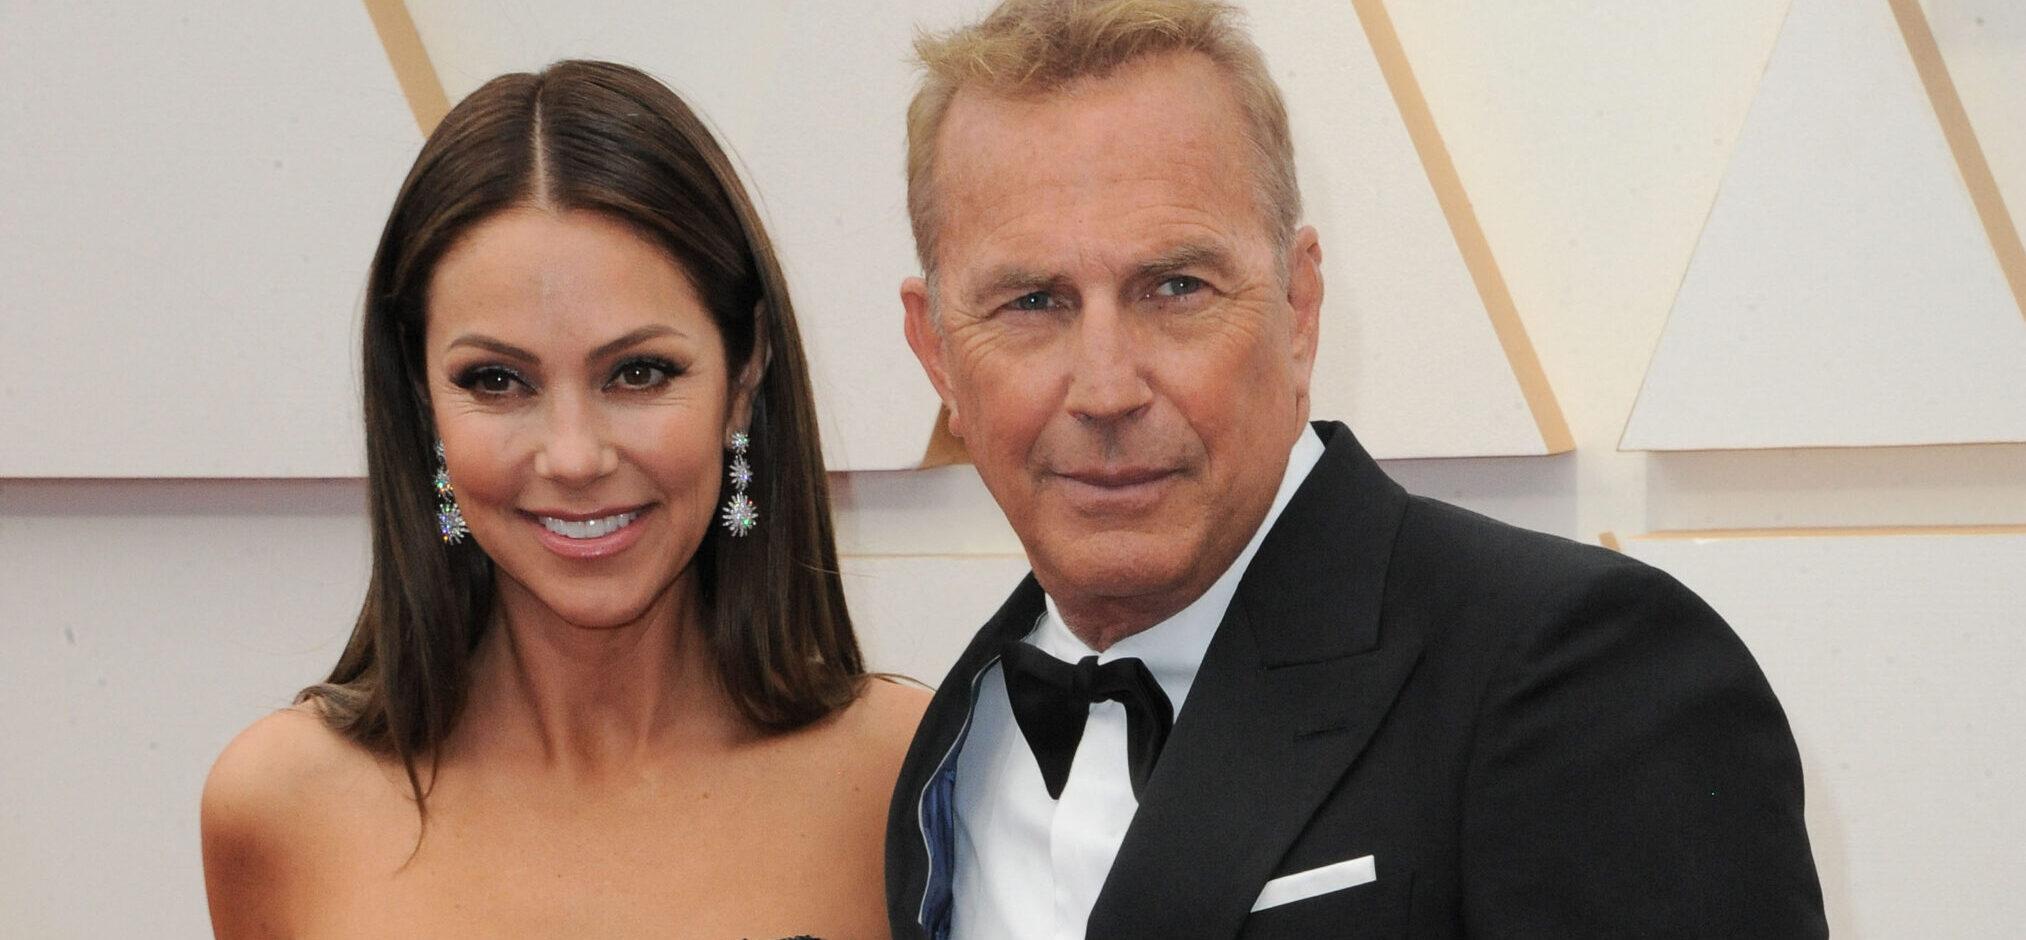 Kevin Costner ‘Had Strong Suspicions’ About His Ex-Wife And His Banker Friend’s Romance